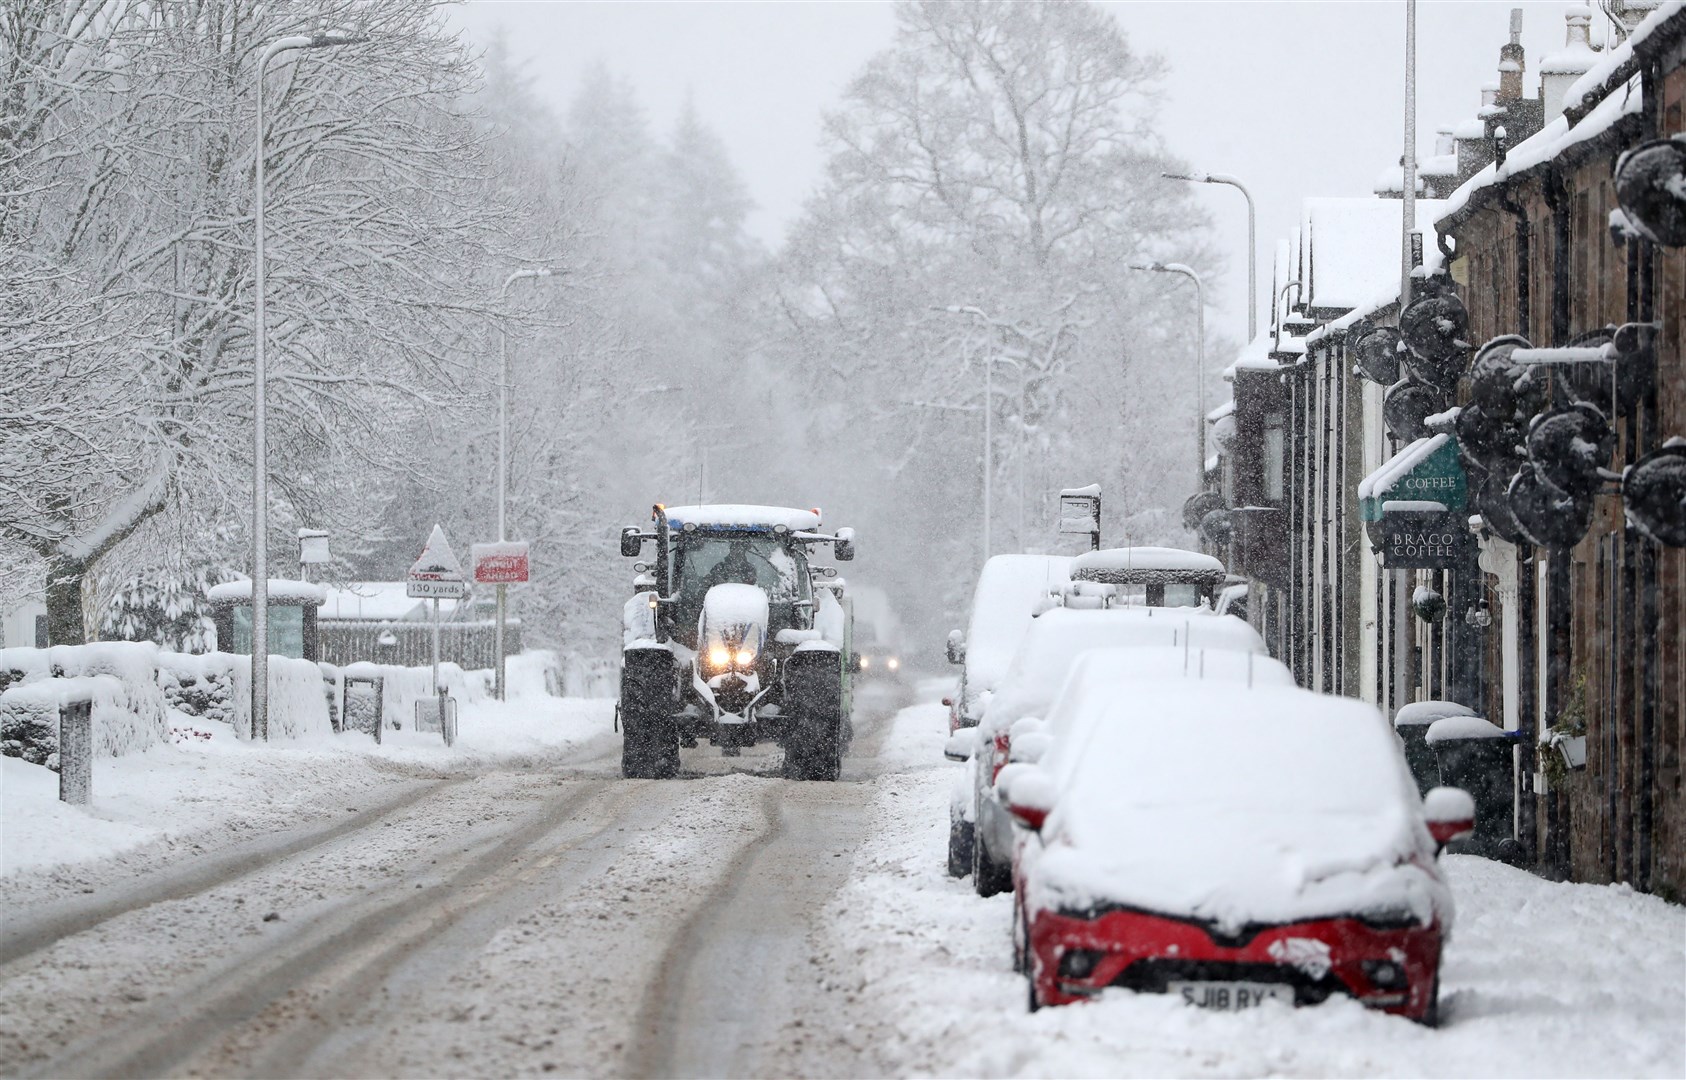 A tractor makes its way through snow in Braco, near Dunblane, in Scotland (Andrew Milligan/PA)